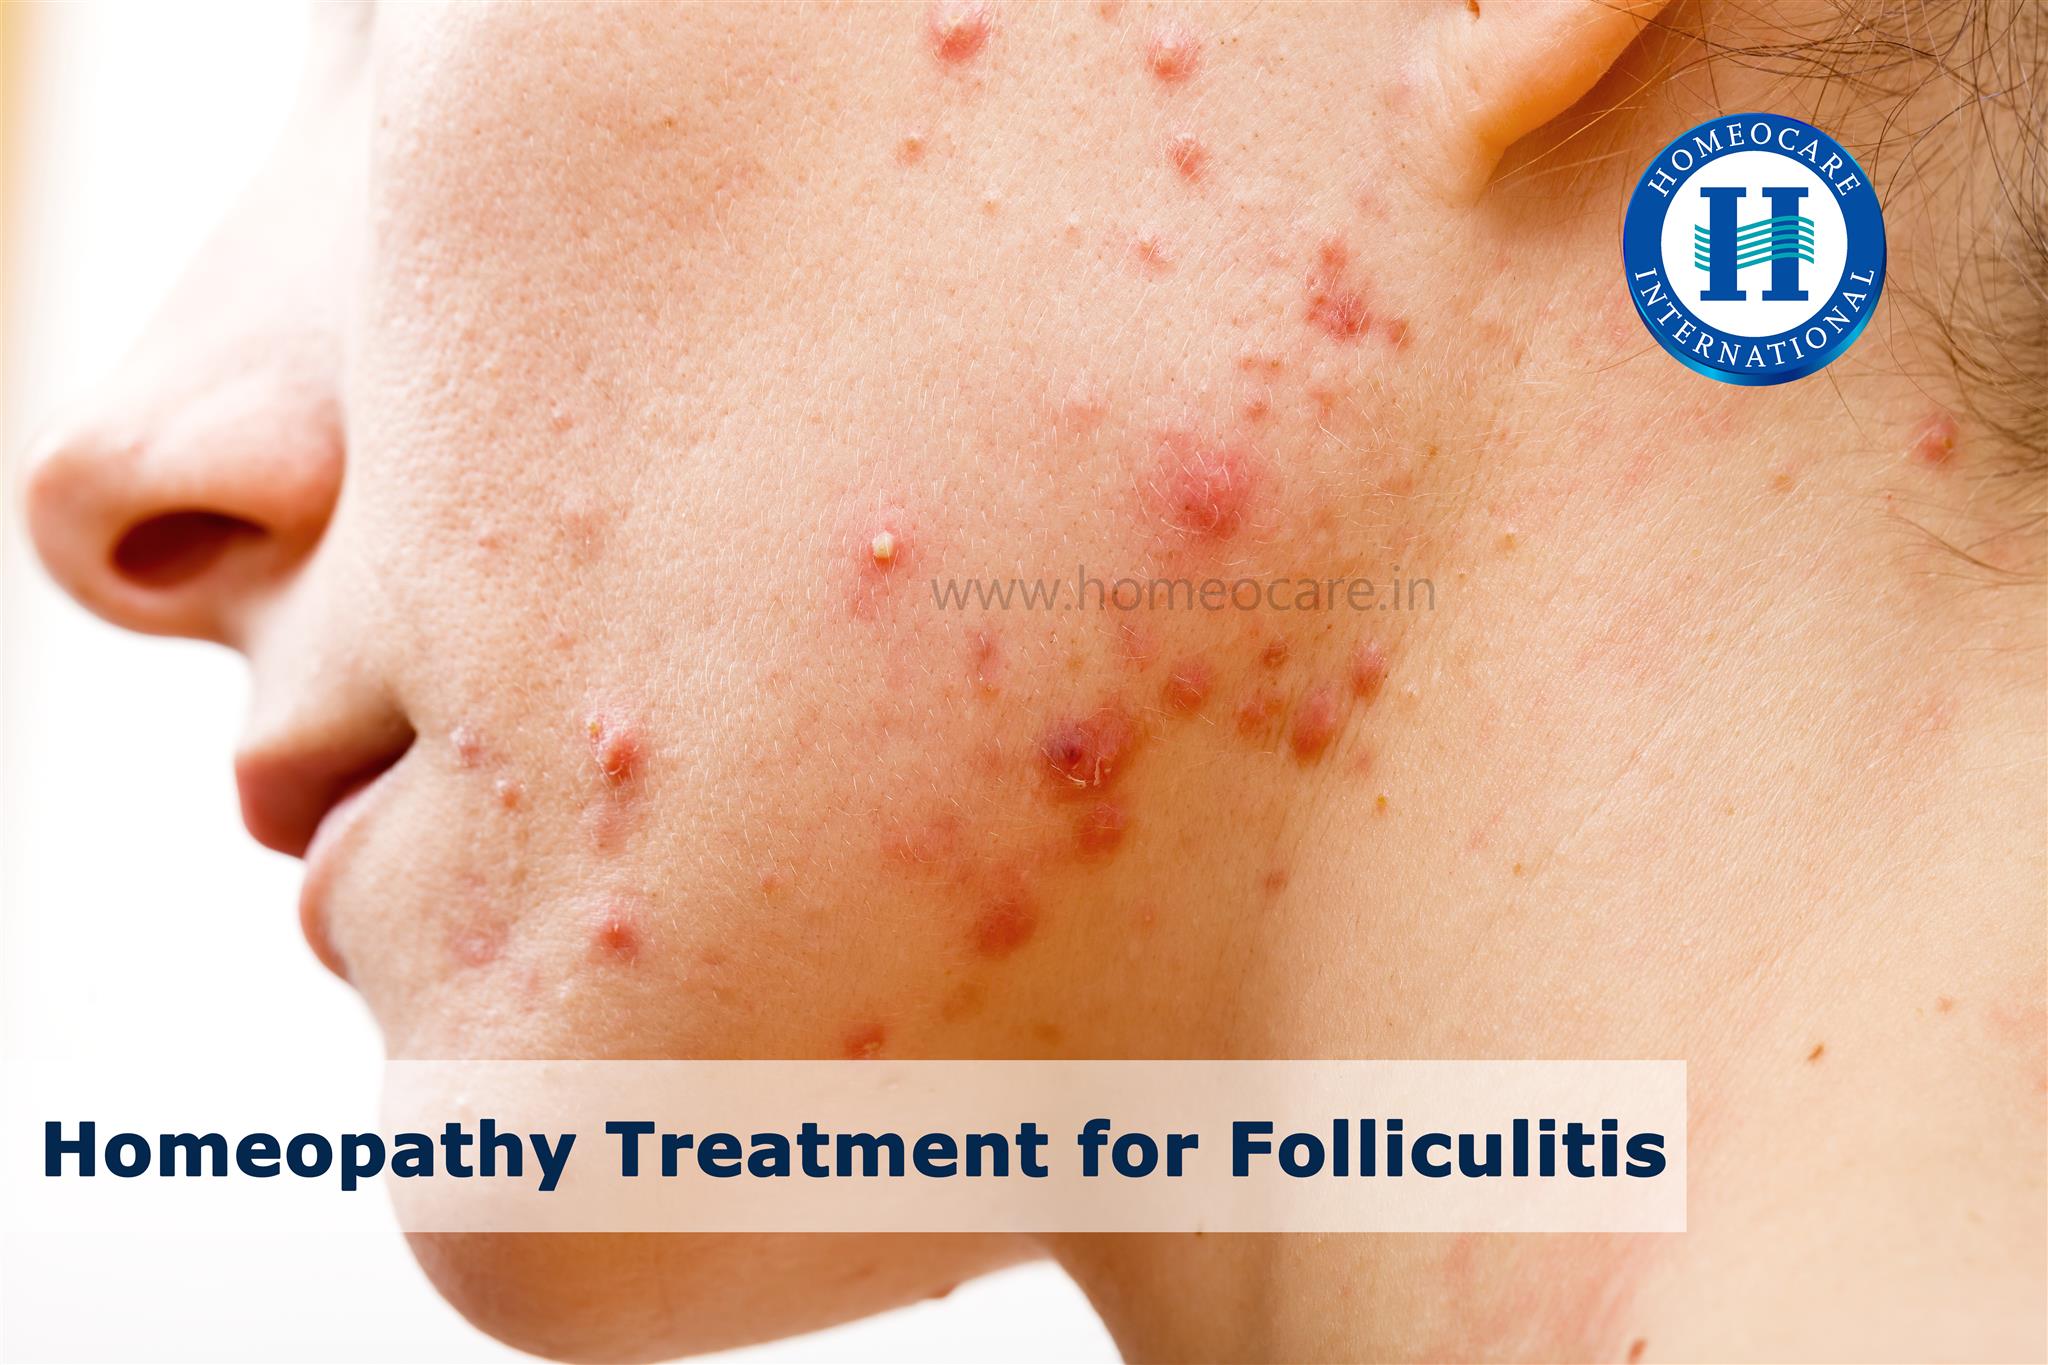 Homeopathy Treatment for Folliculitis